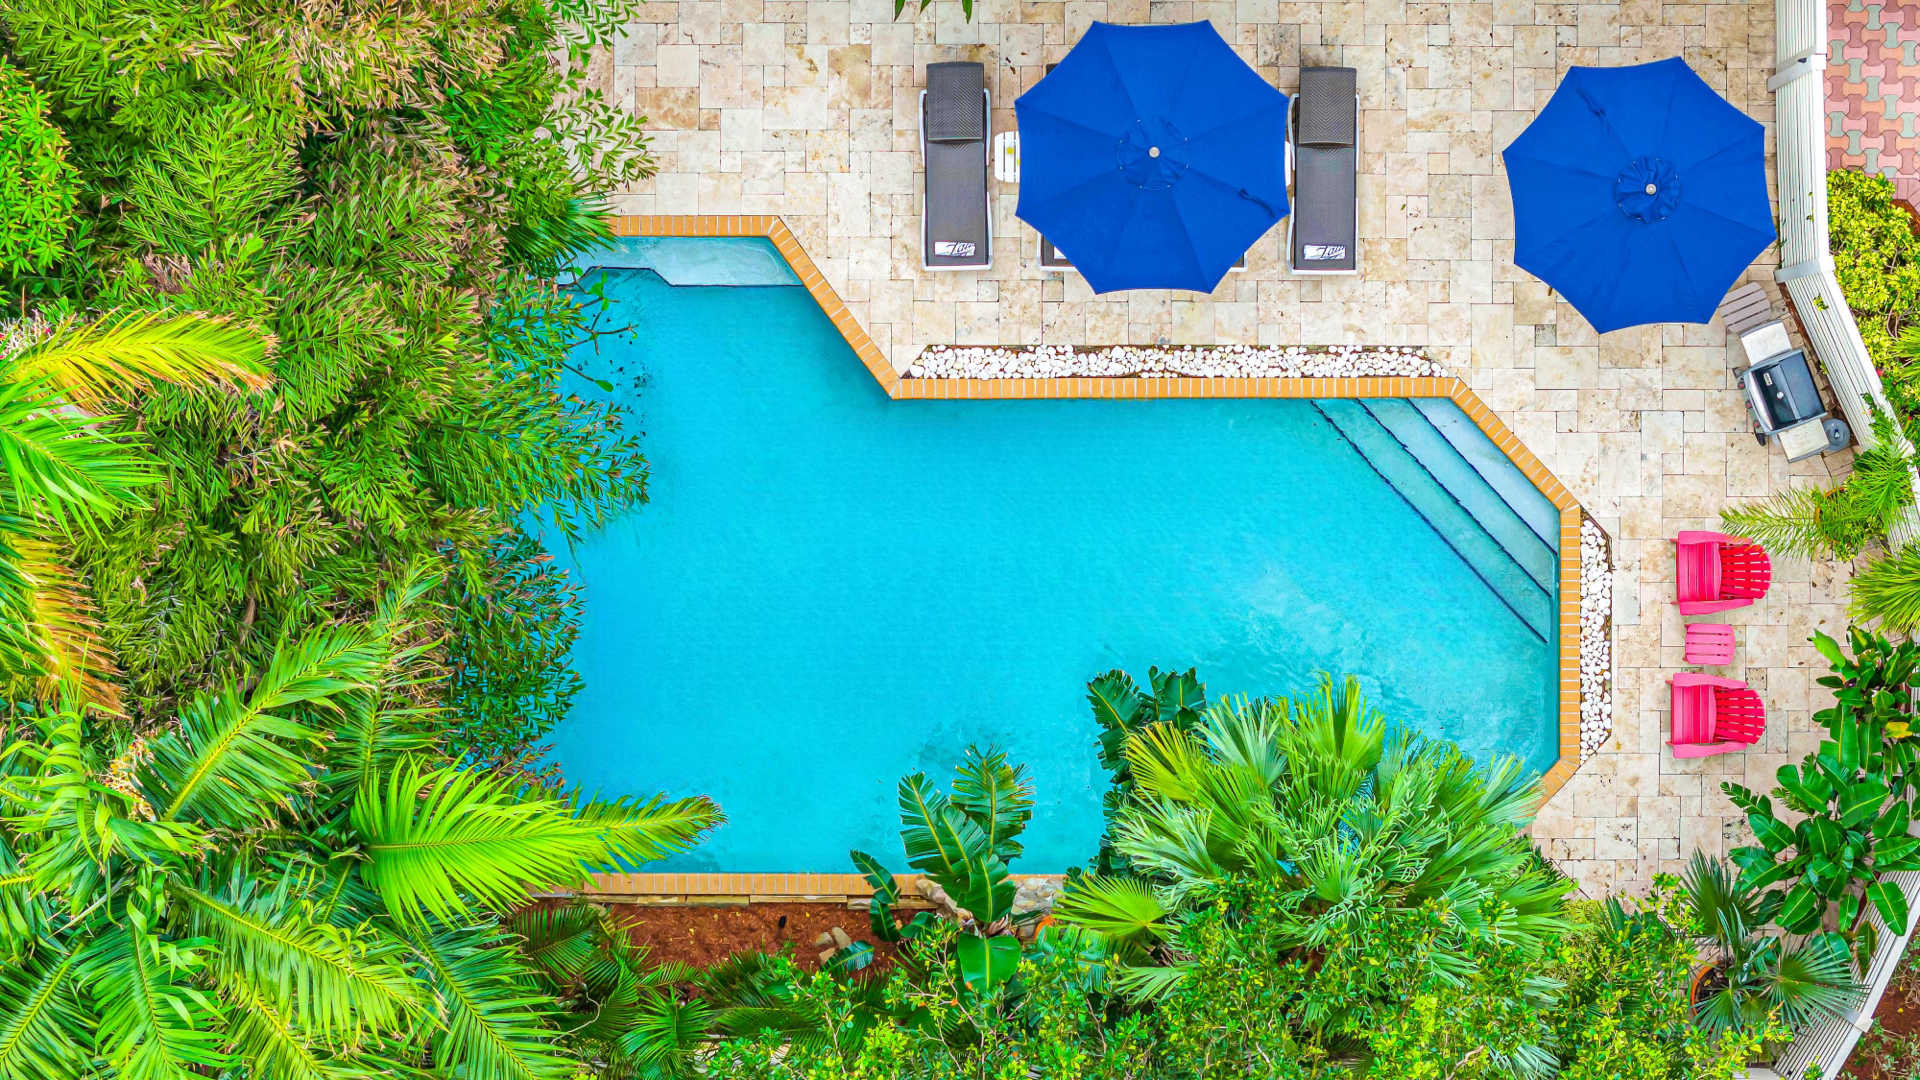 Come dive into the heated pool at Escape Key.